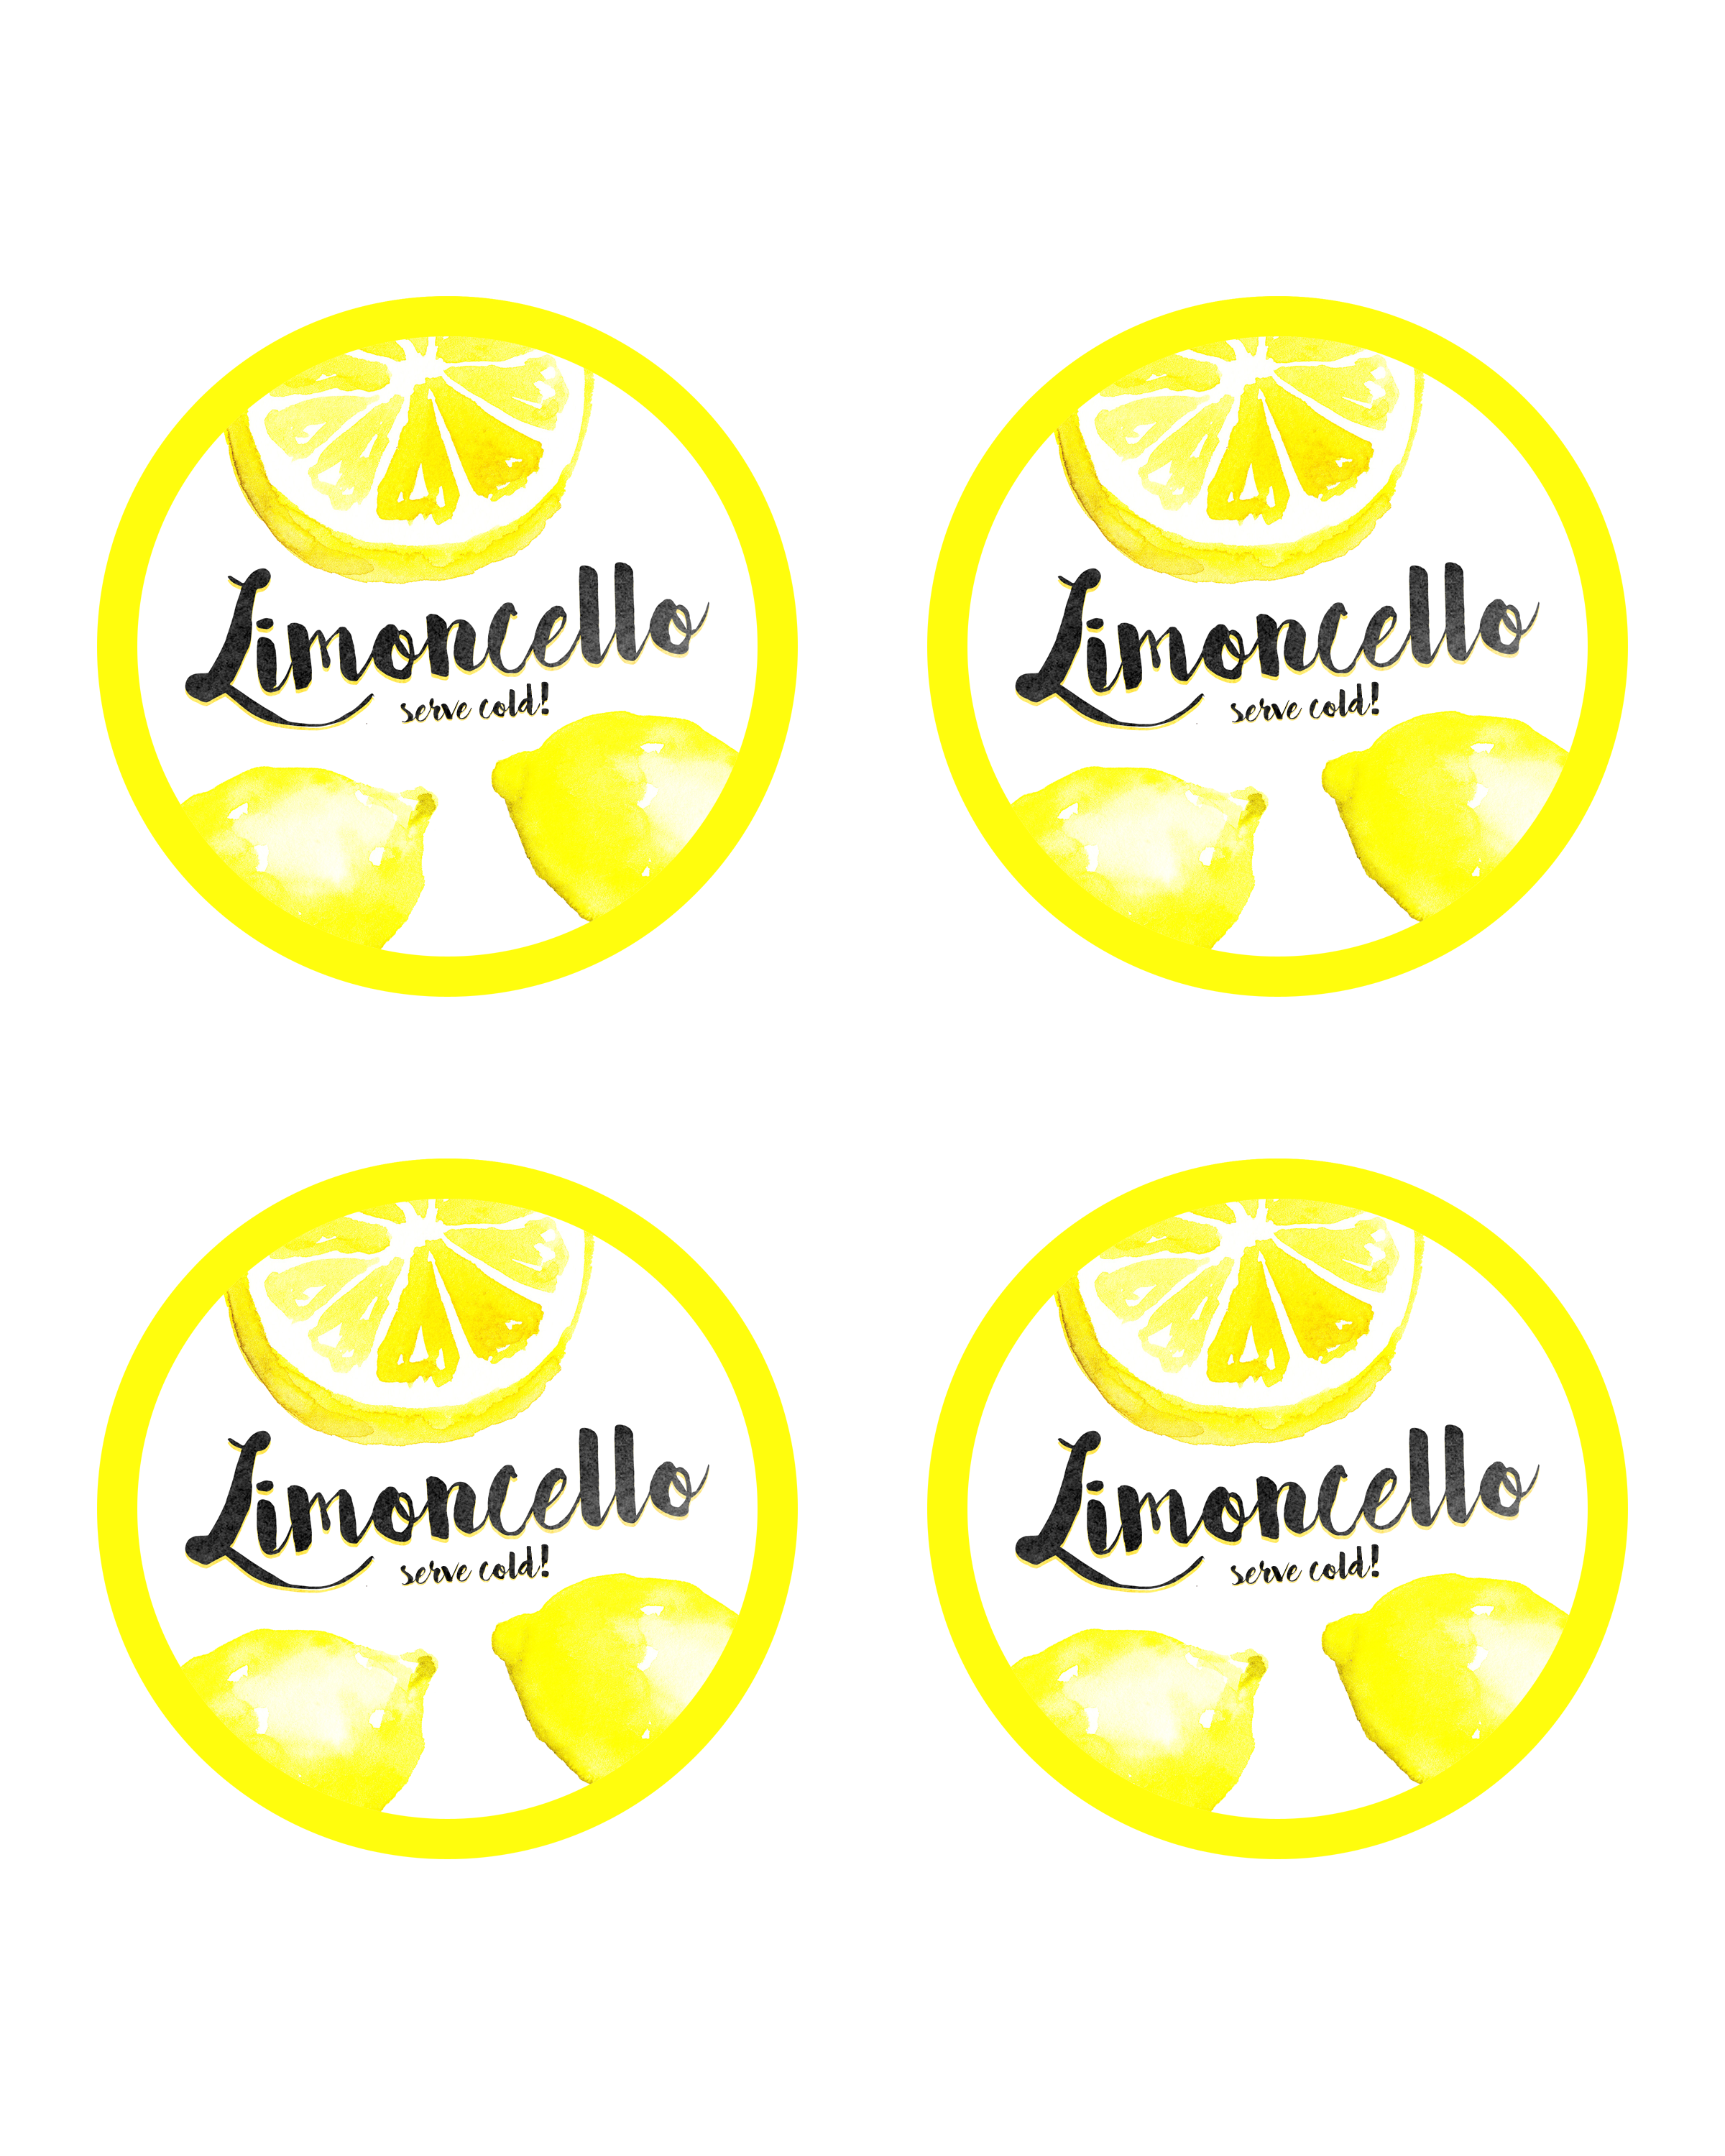 Homemade Limoncello With Free Printable Labels The Cottage Market